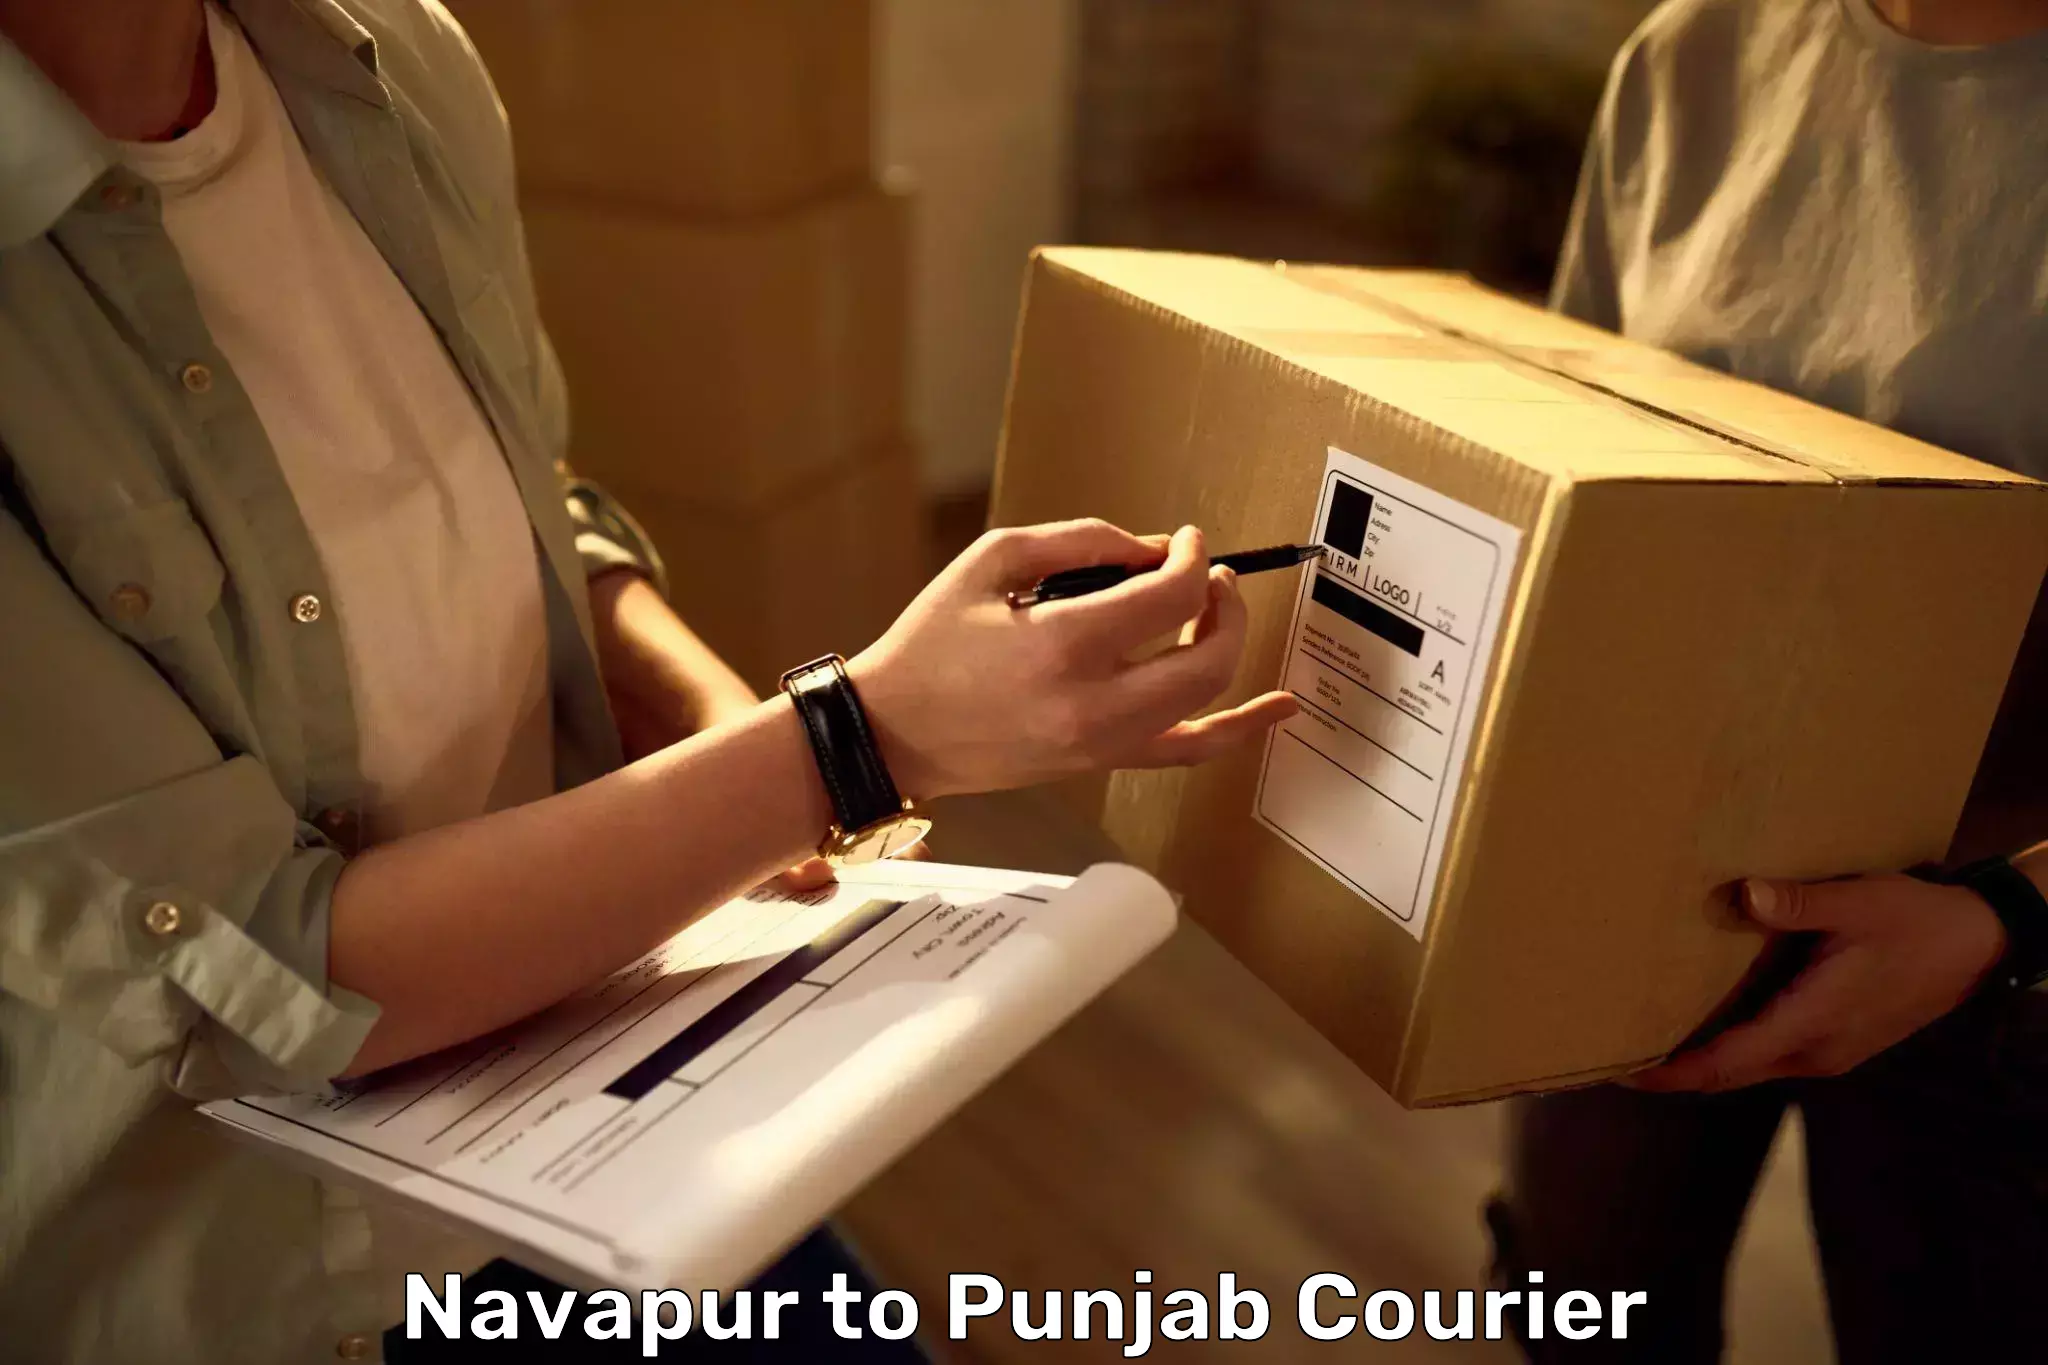 Personal effects shipping in Navapur to Dhuri